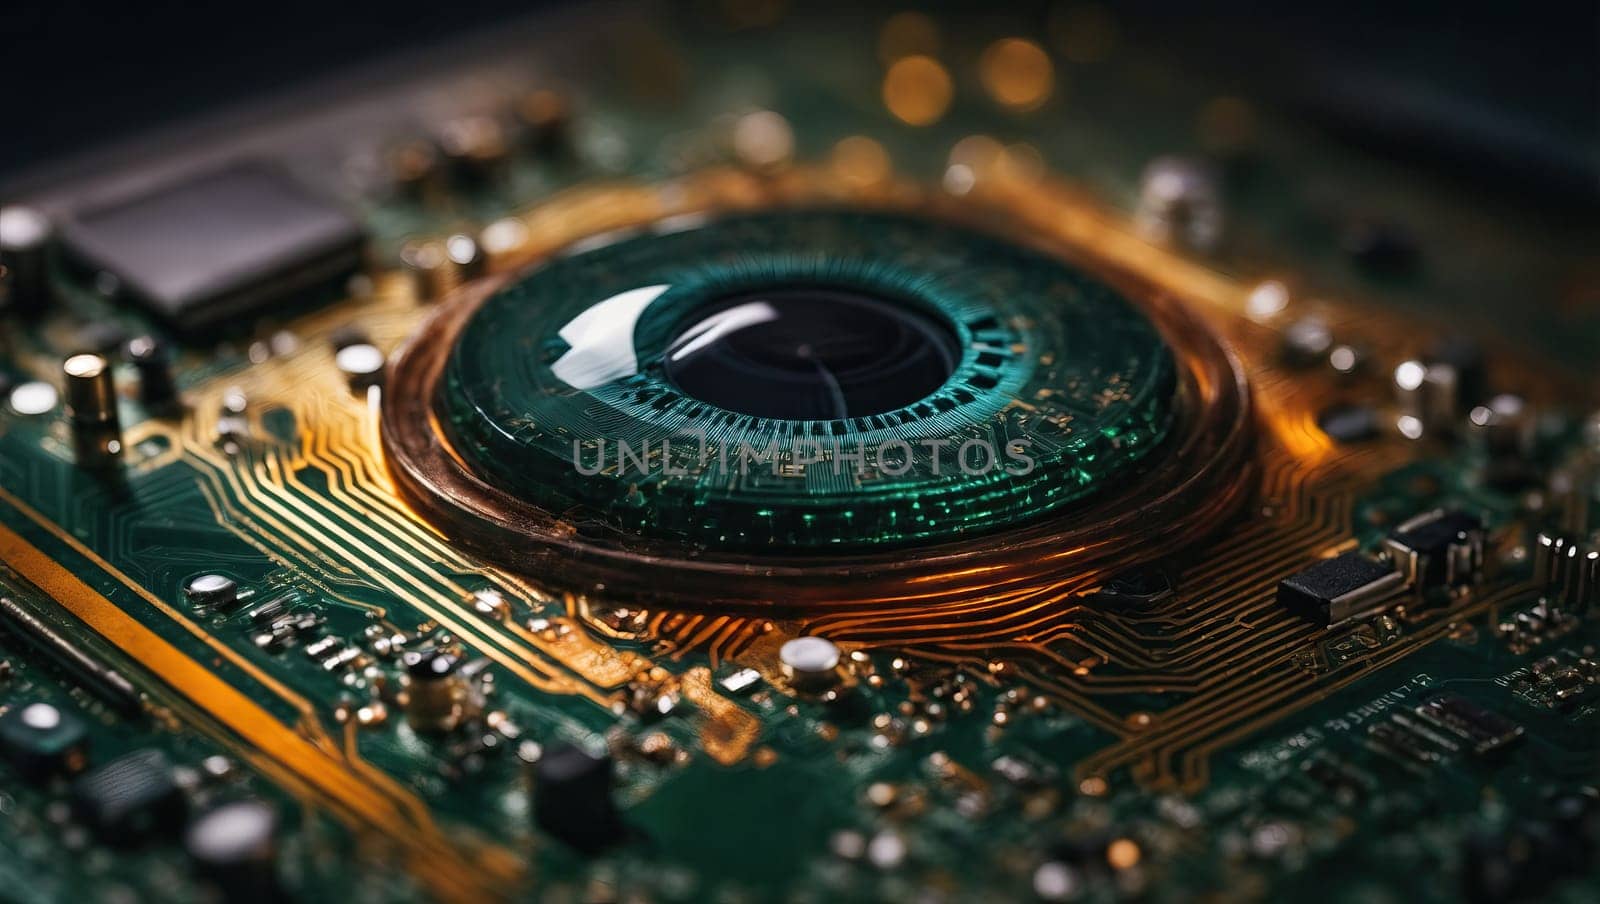 Electronic circuit board overlay in the pupil of eye by applesstock